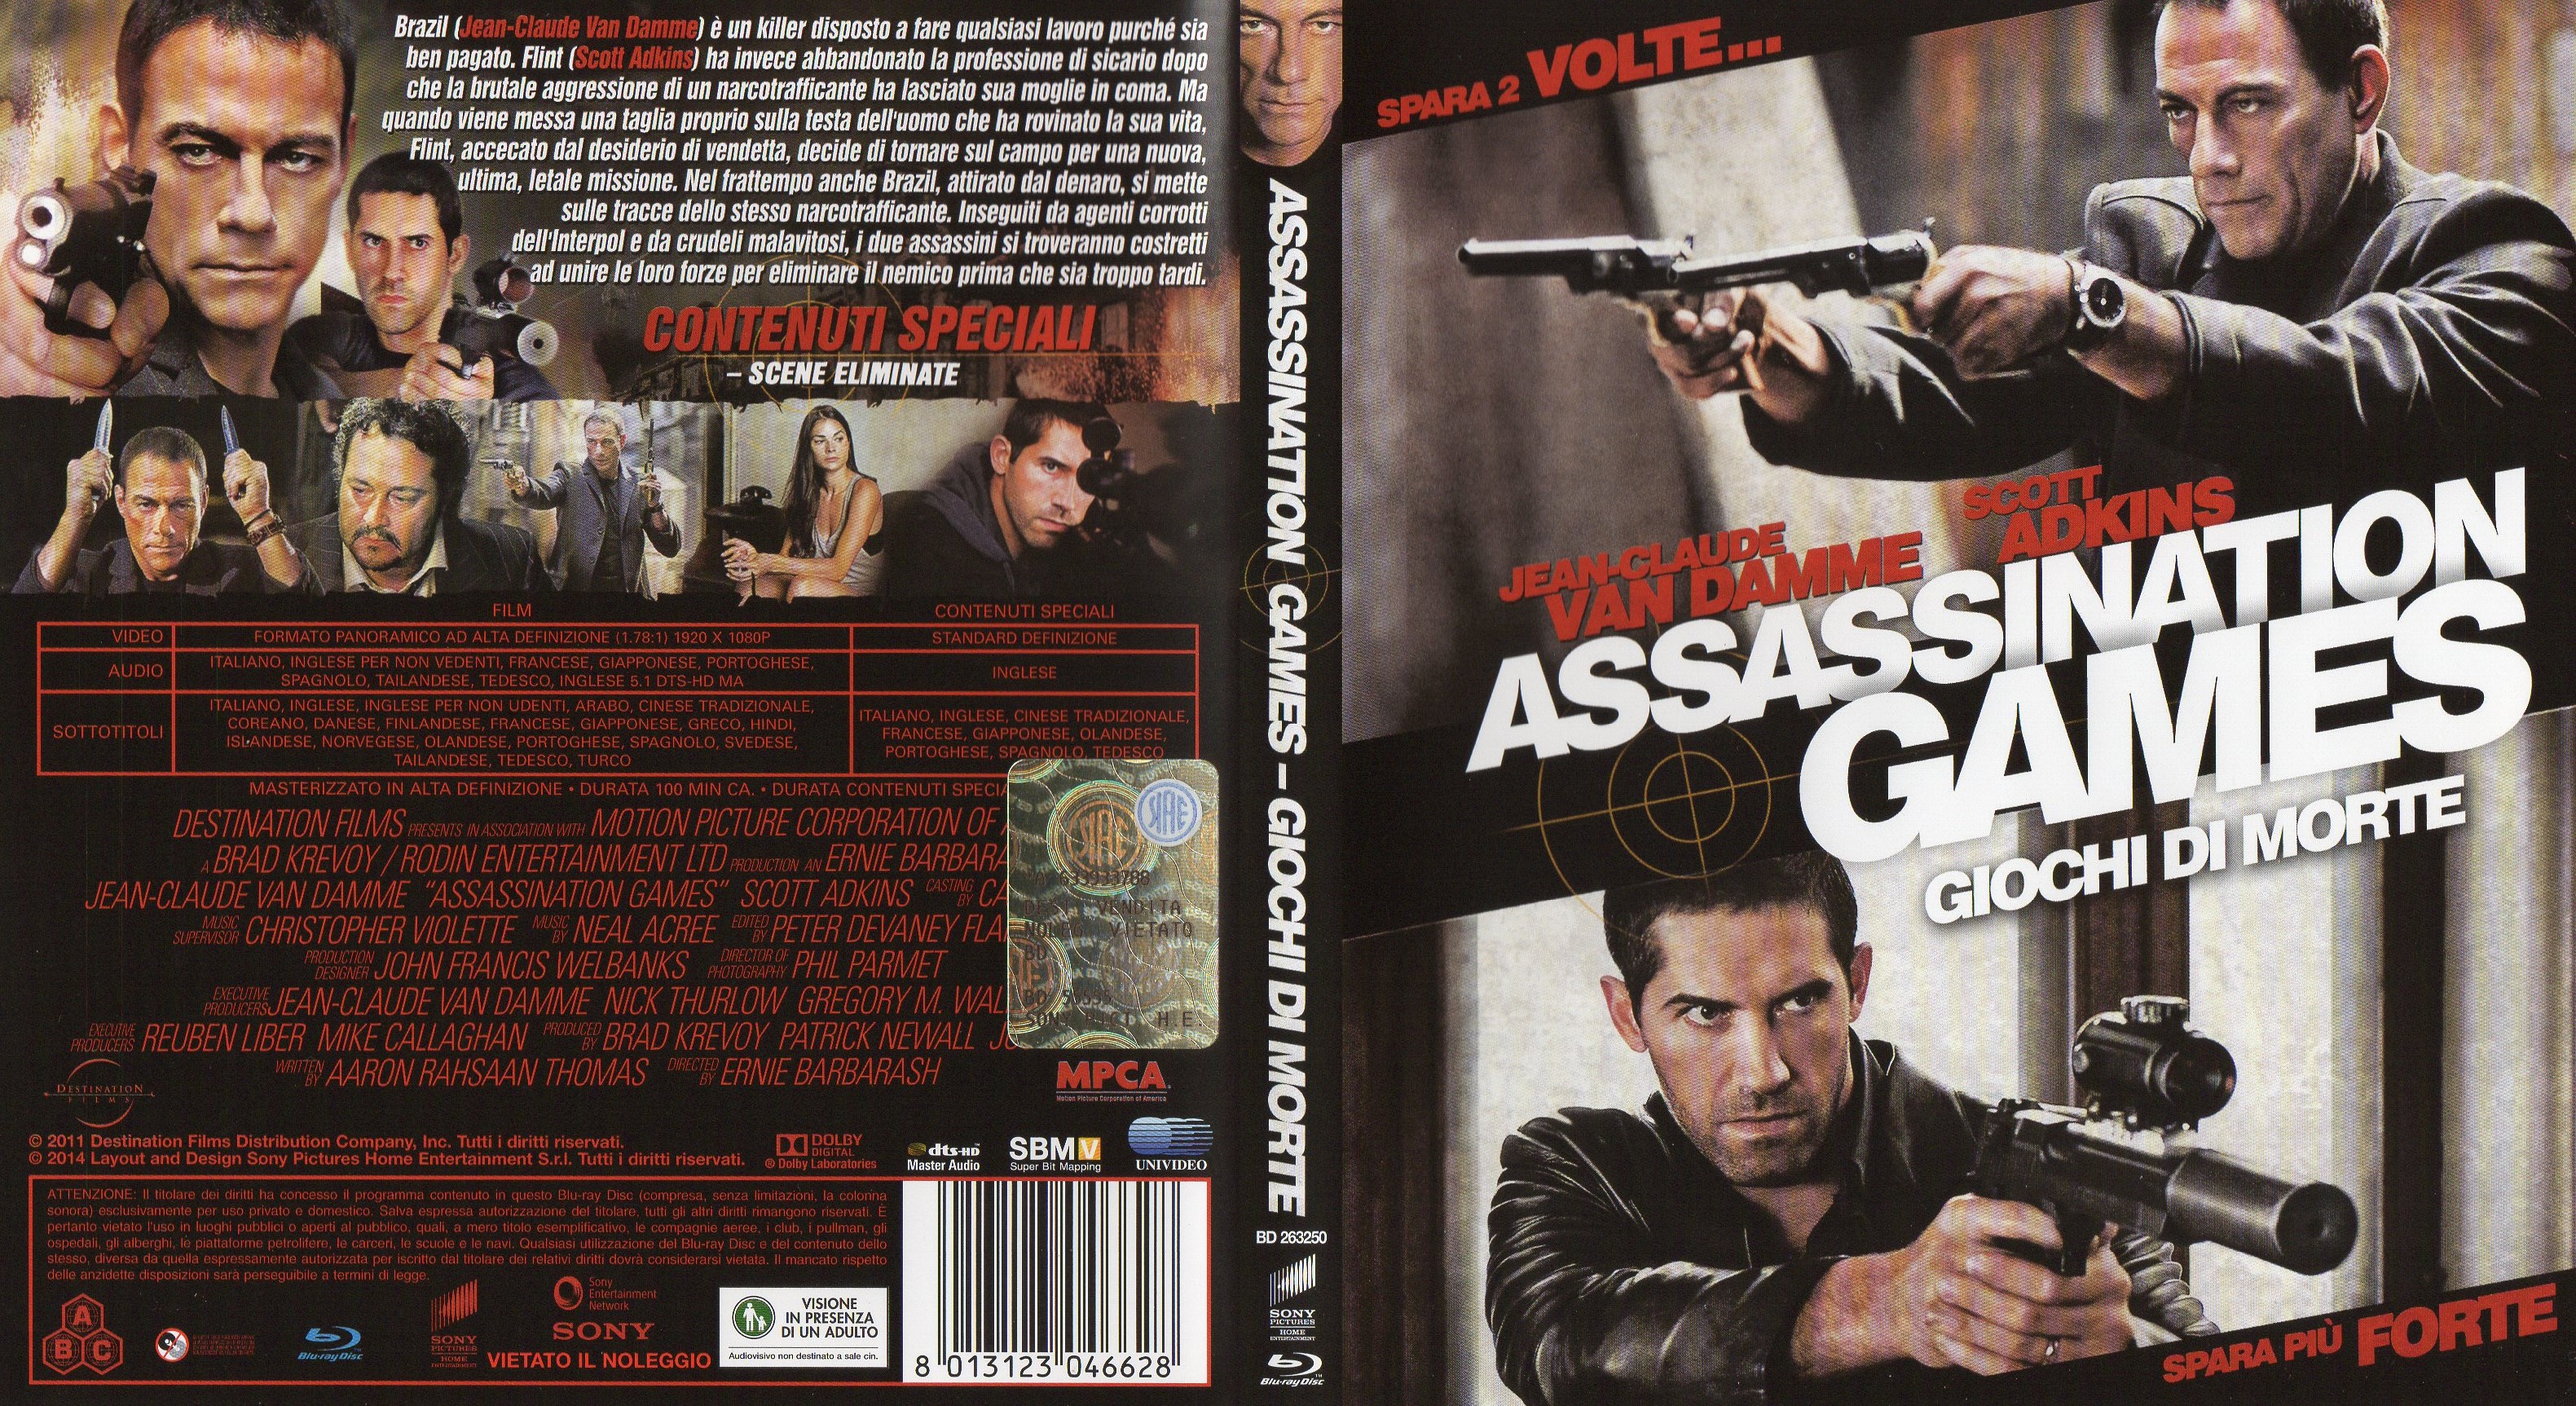 Jaquette DVD Assassination games (BLU-RAY)